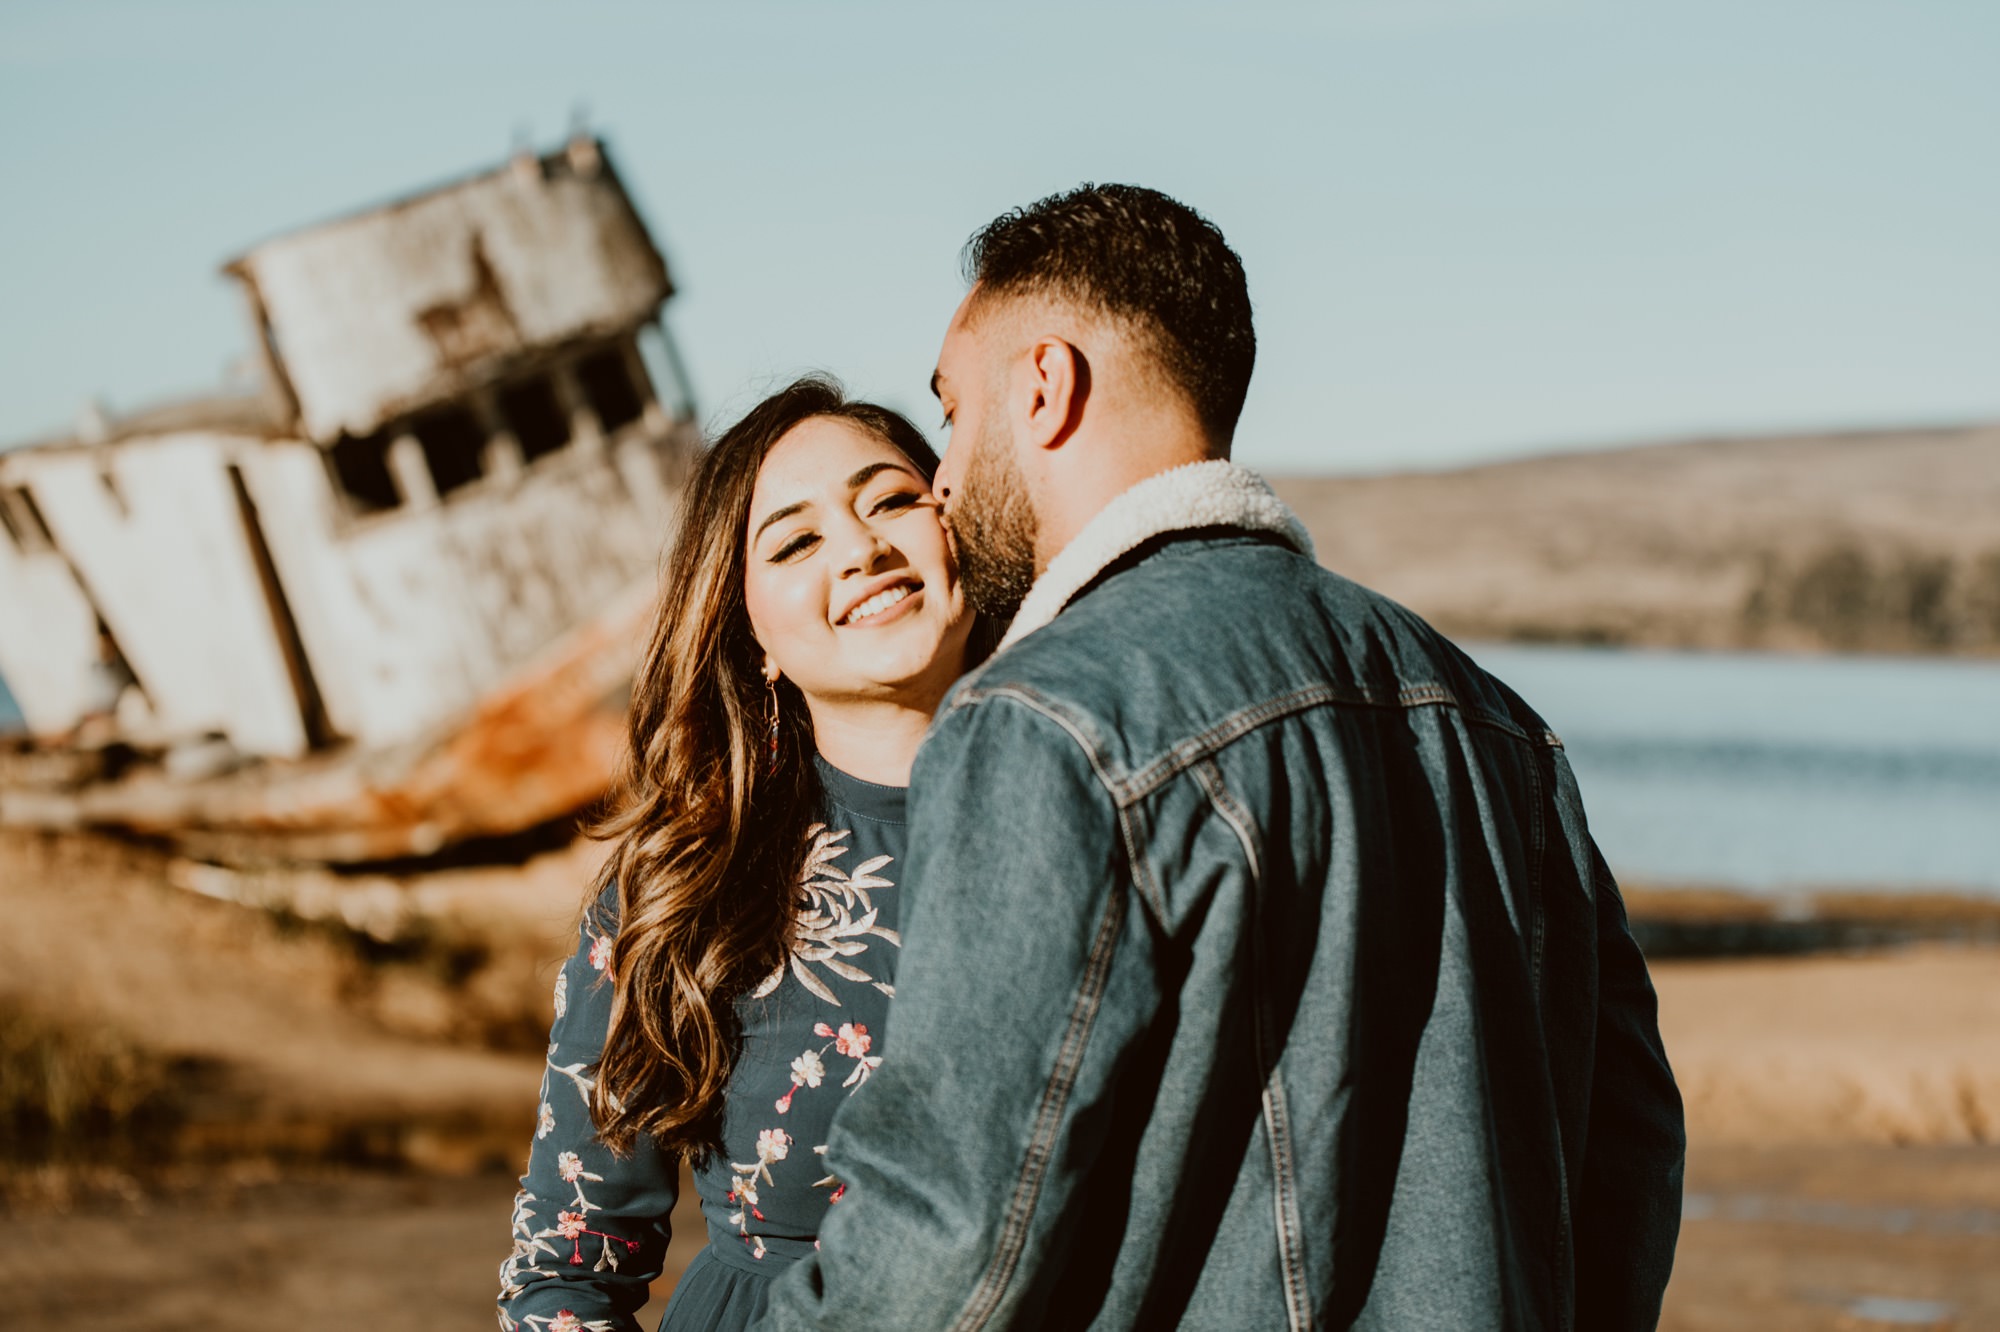 A man kisses the cheek of a woman in the sunlight while they stand in front of the Inverness shipwreck during their Point Reyes engagement session.